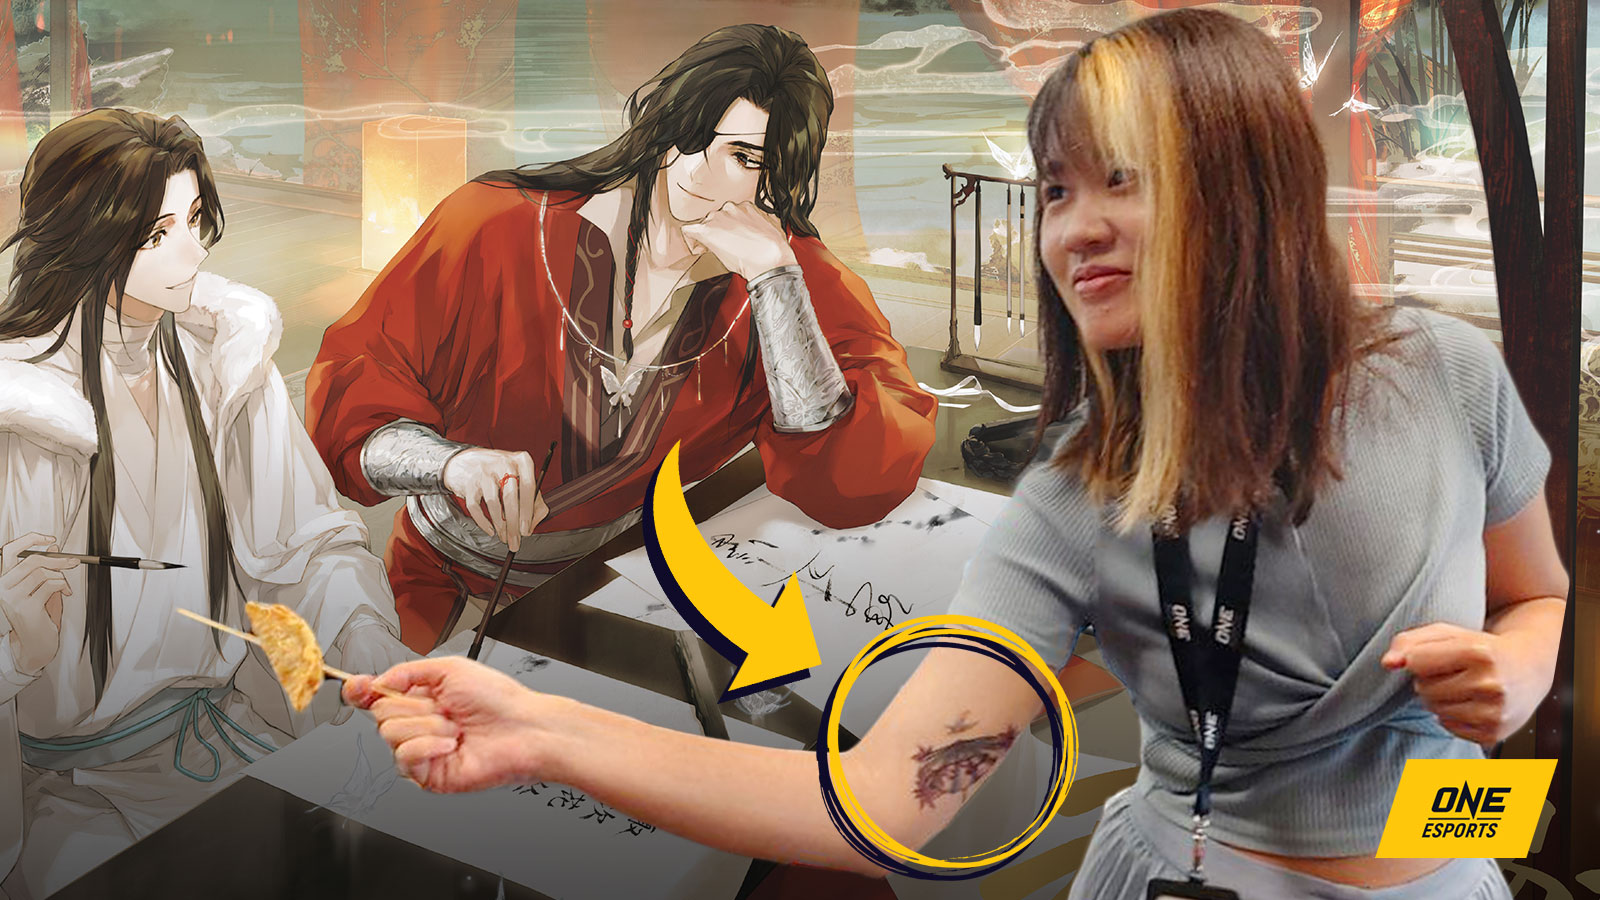 I got a Heaven Official's Blessing tattoo after 13 episodes | ONE Esports